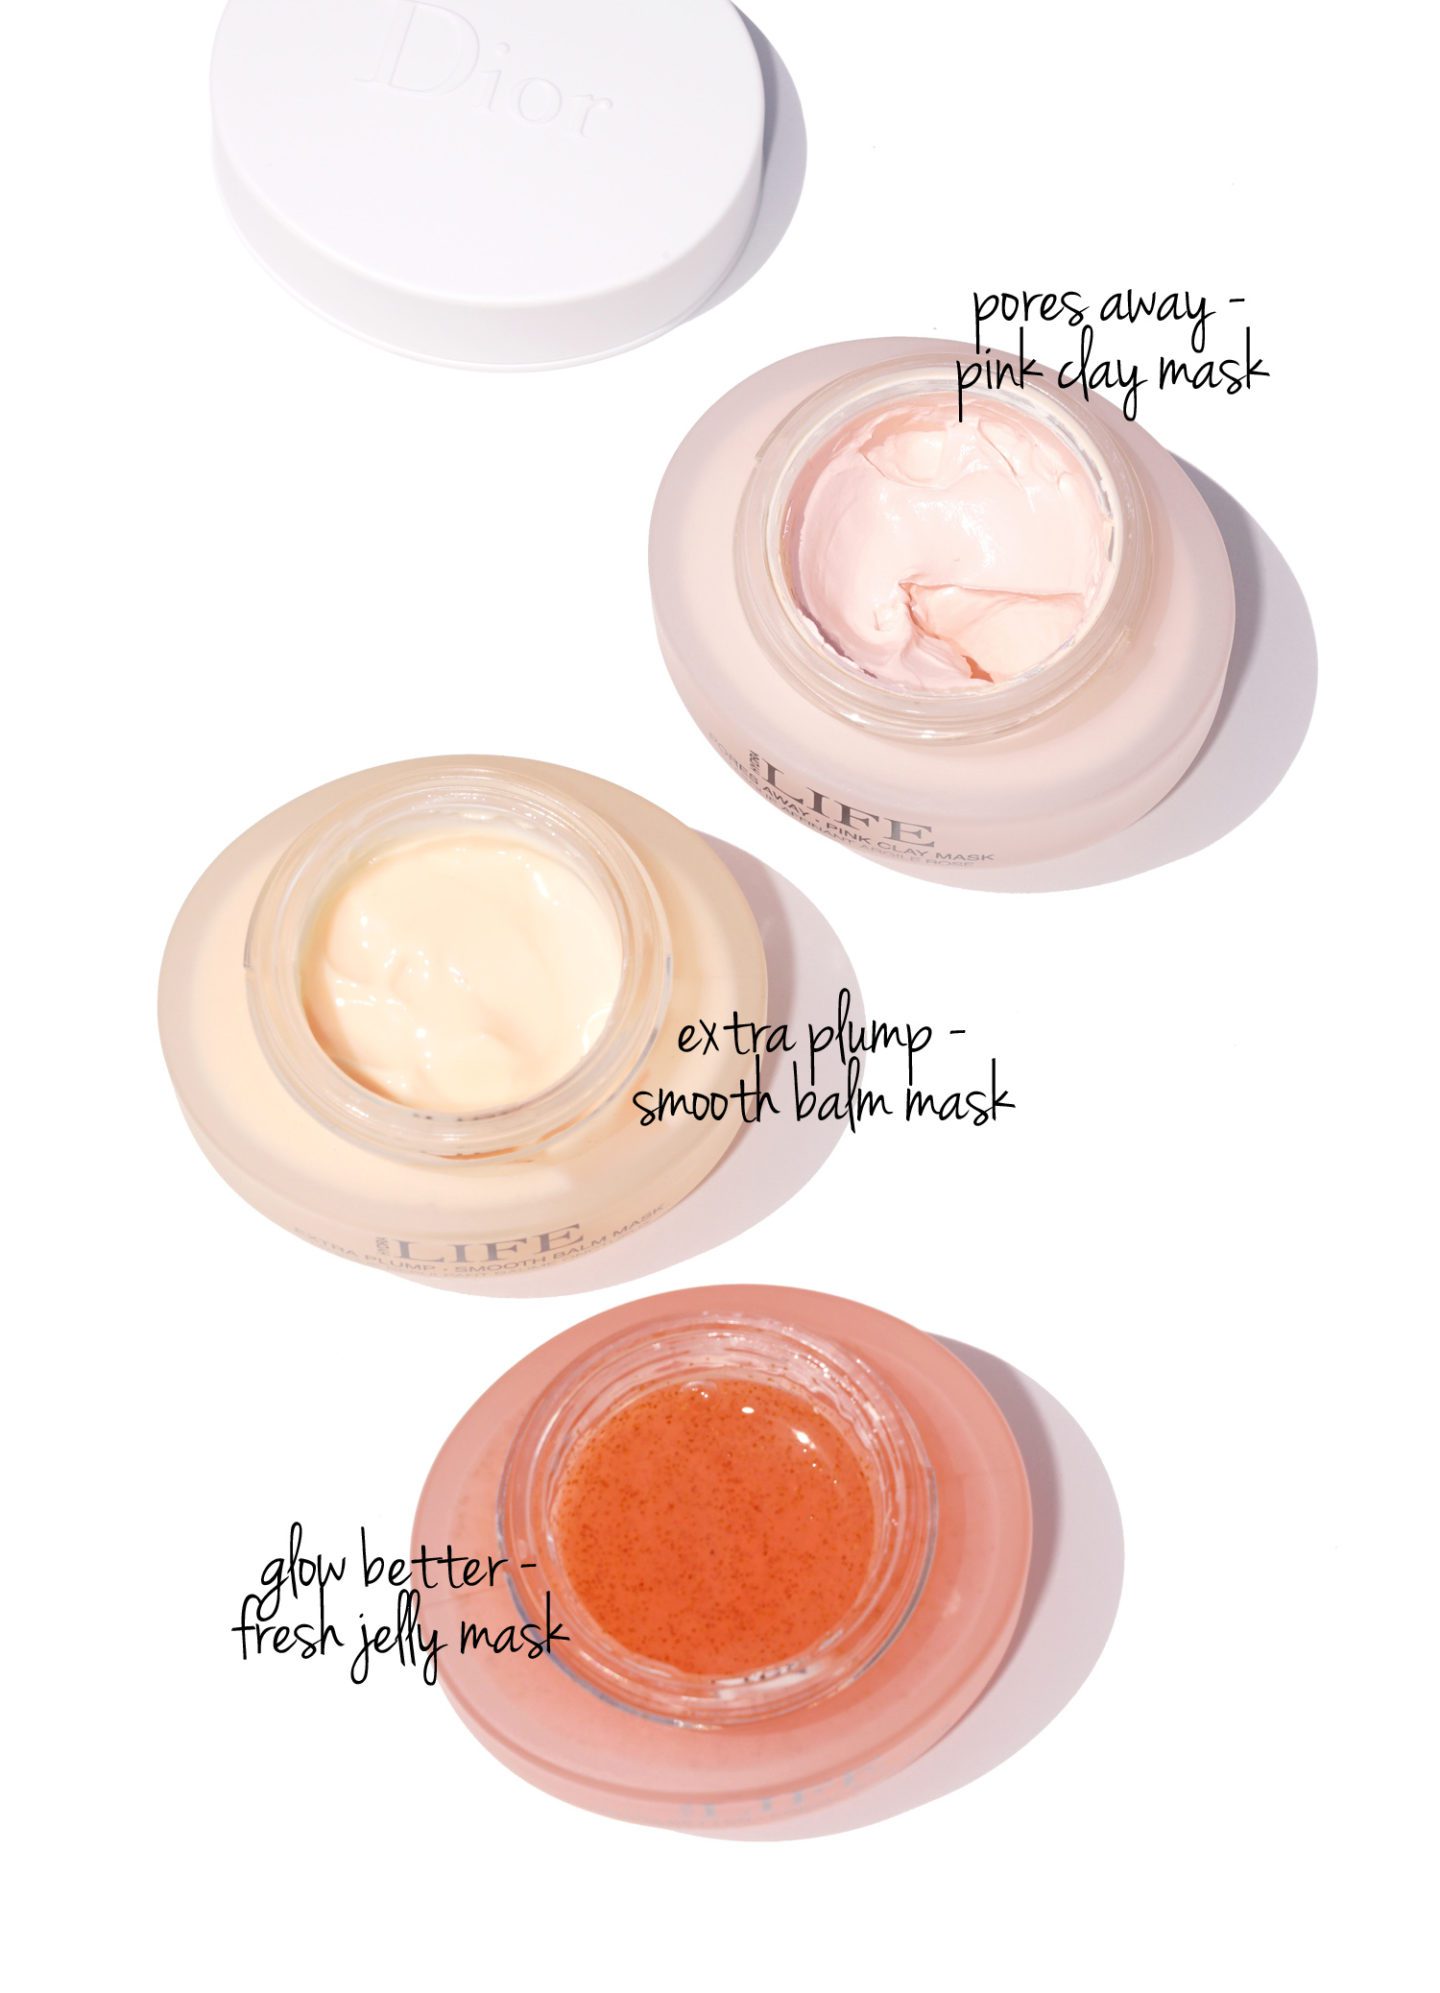 Dior Hydra Life Masks | The beauty look book